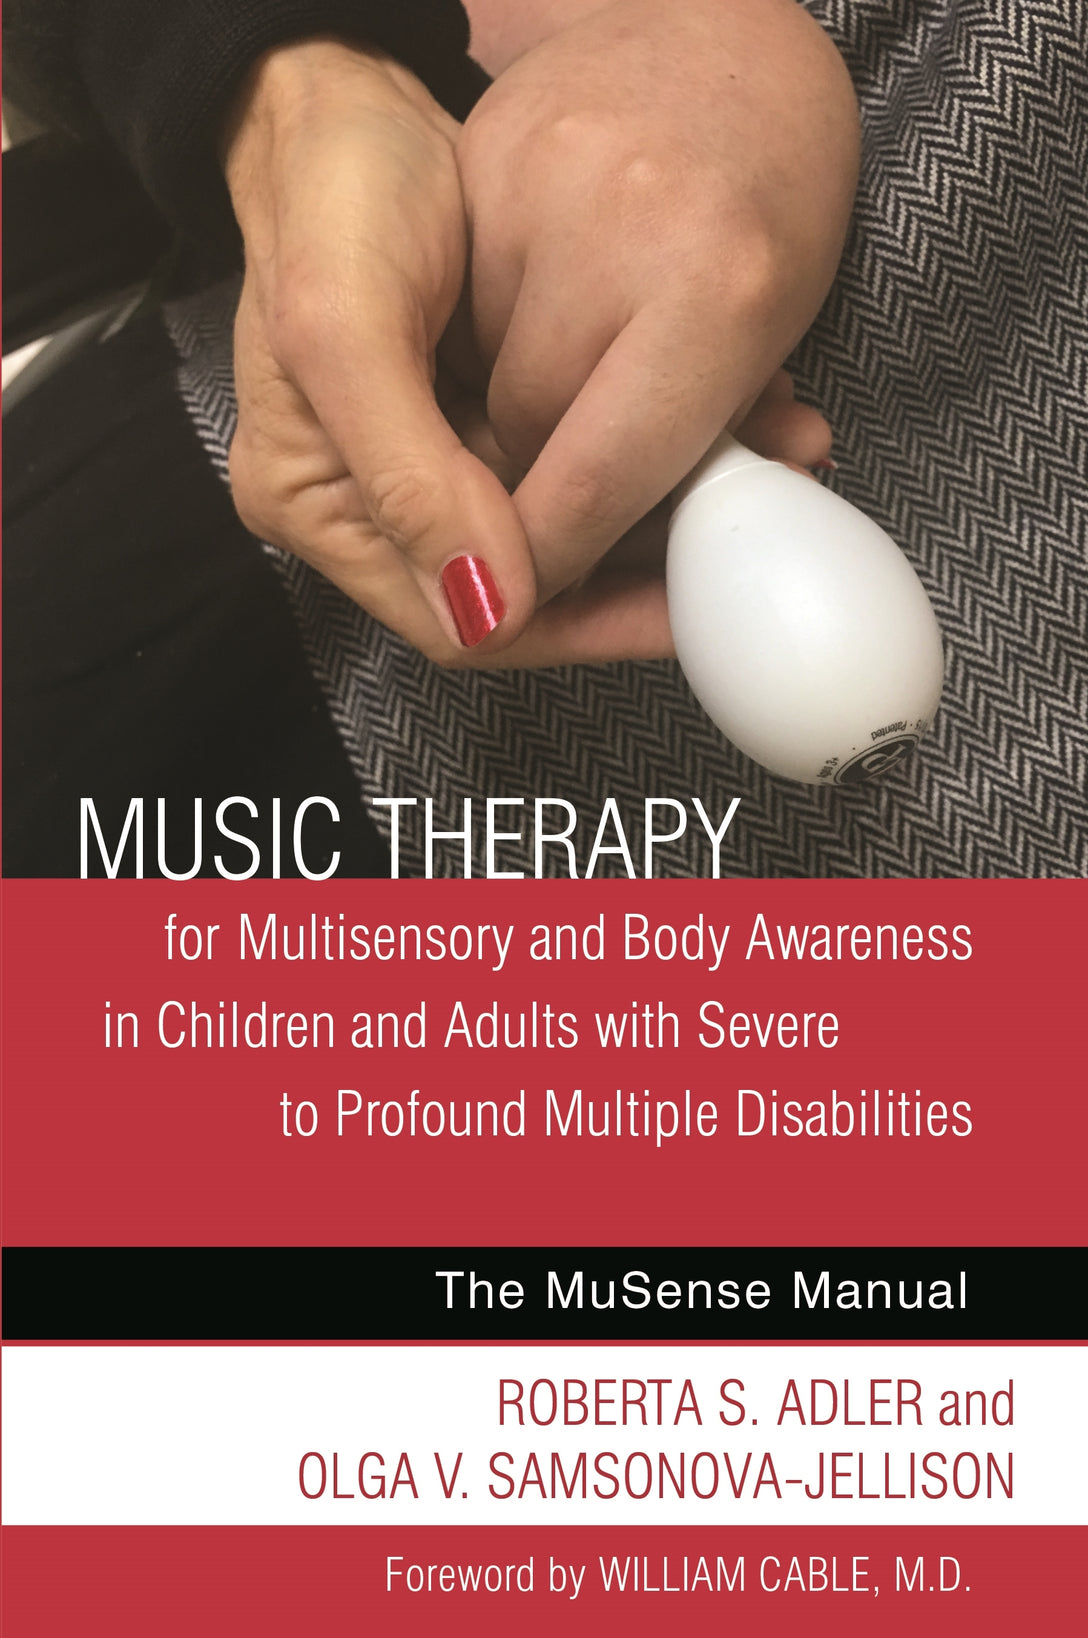 Music Therapy for Multisensory and Body Awareness in Children and Adults with Severe to Profound Multiple Disabilities by William Cable, Roberta S. Adler, Olga V. Samsonova-Jellison